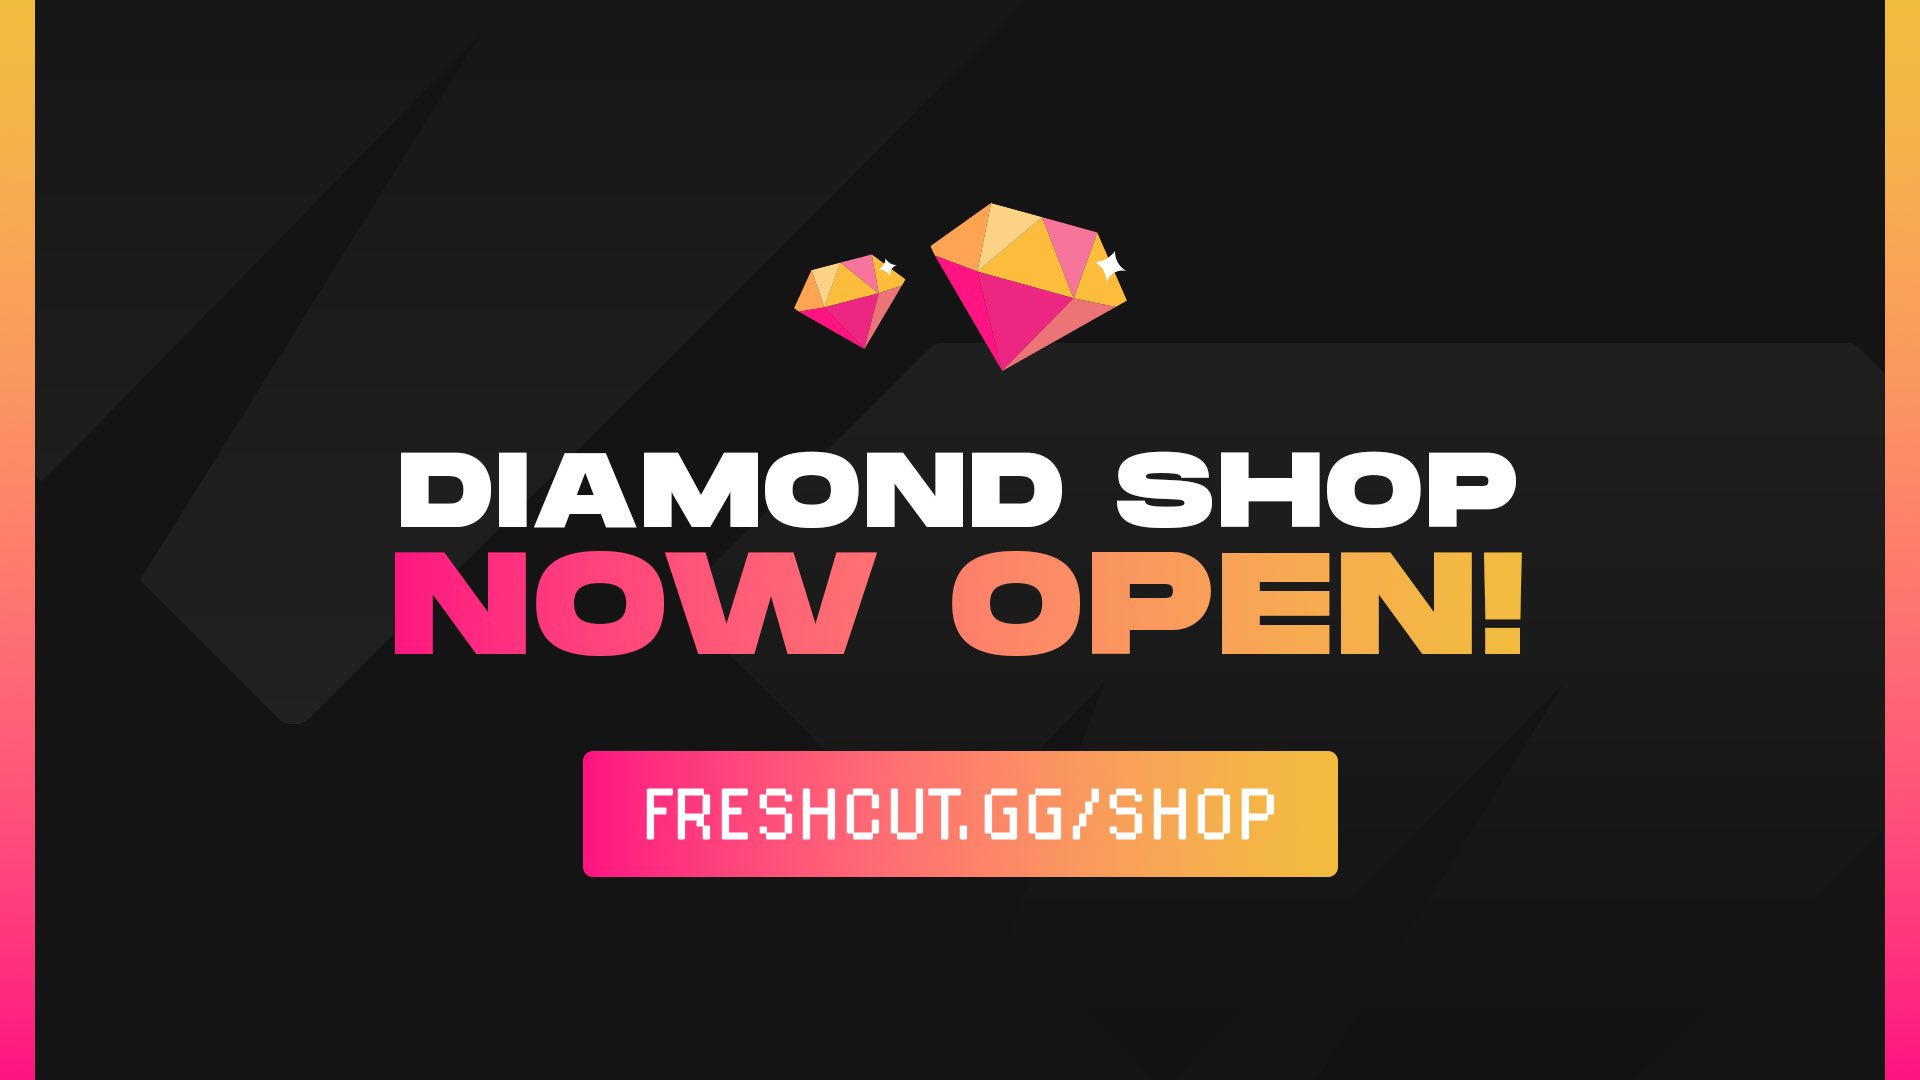 FreshCut on X: 💎 𝗗𝗶𝗮𝗺𝗼𝗻𝗱 𝗦𝗵𝗼𝗽 On top of tipping your favorite  creators, you can now spend your hard earned diamonds right here on things  like Robux, Nintendo Gift Cards,  Gift